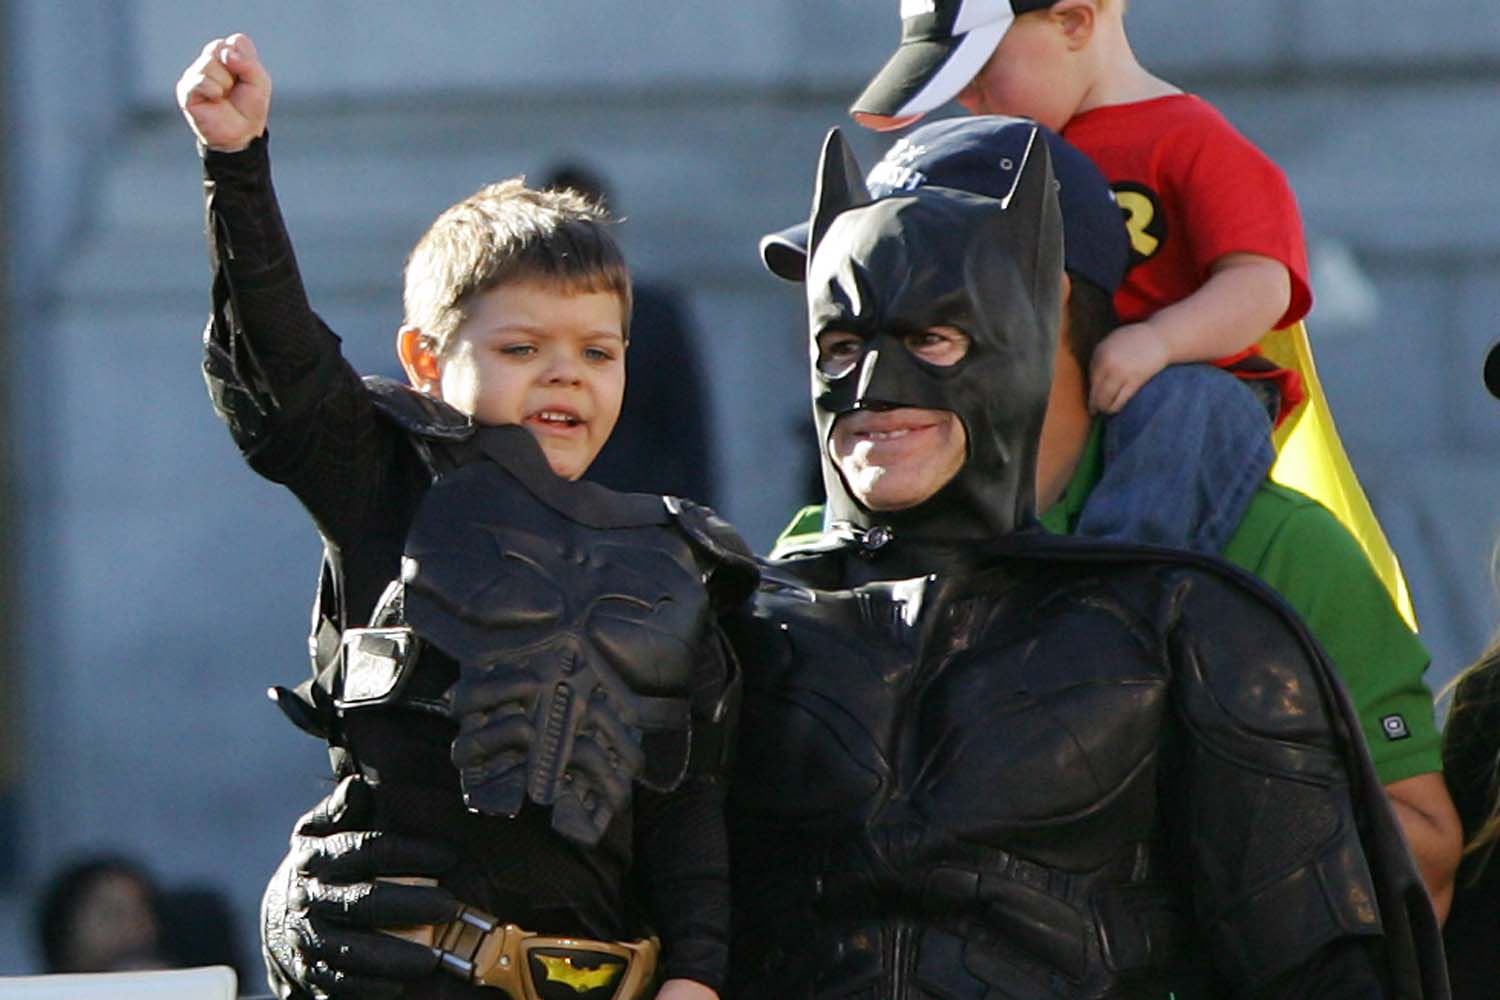 San Francisco comes together to help batkid save the city - and to grant the wish of an ill child. 2013